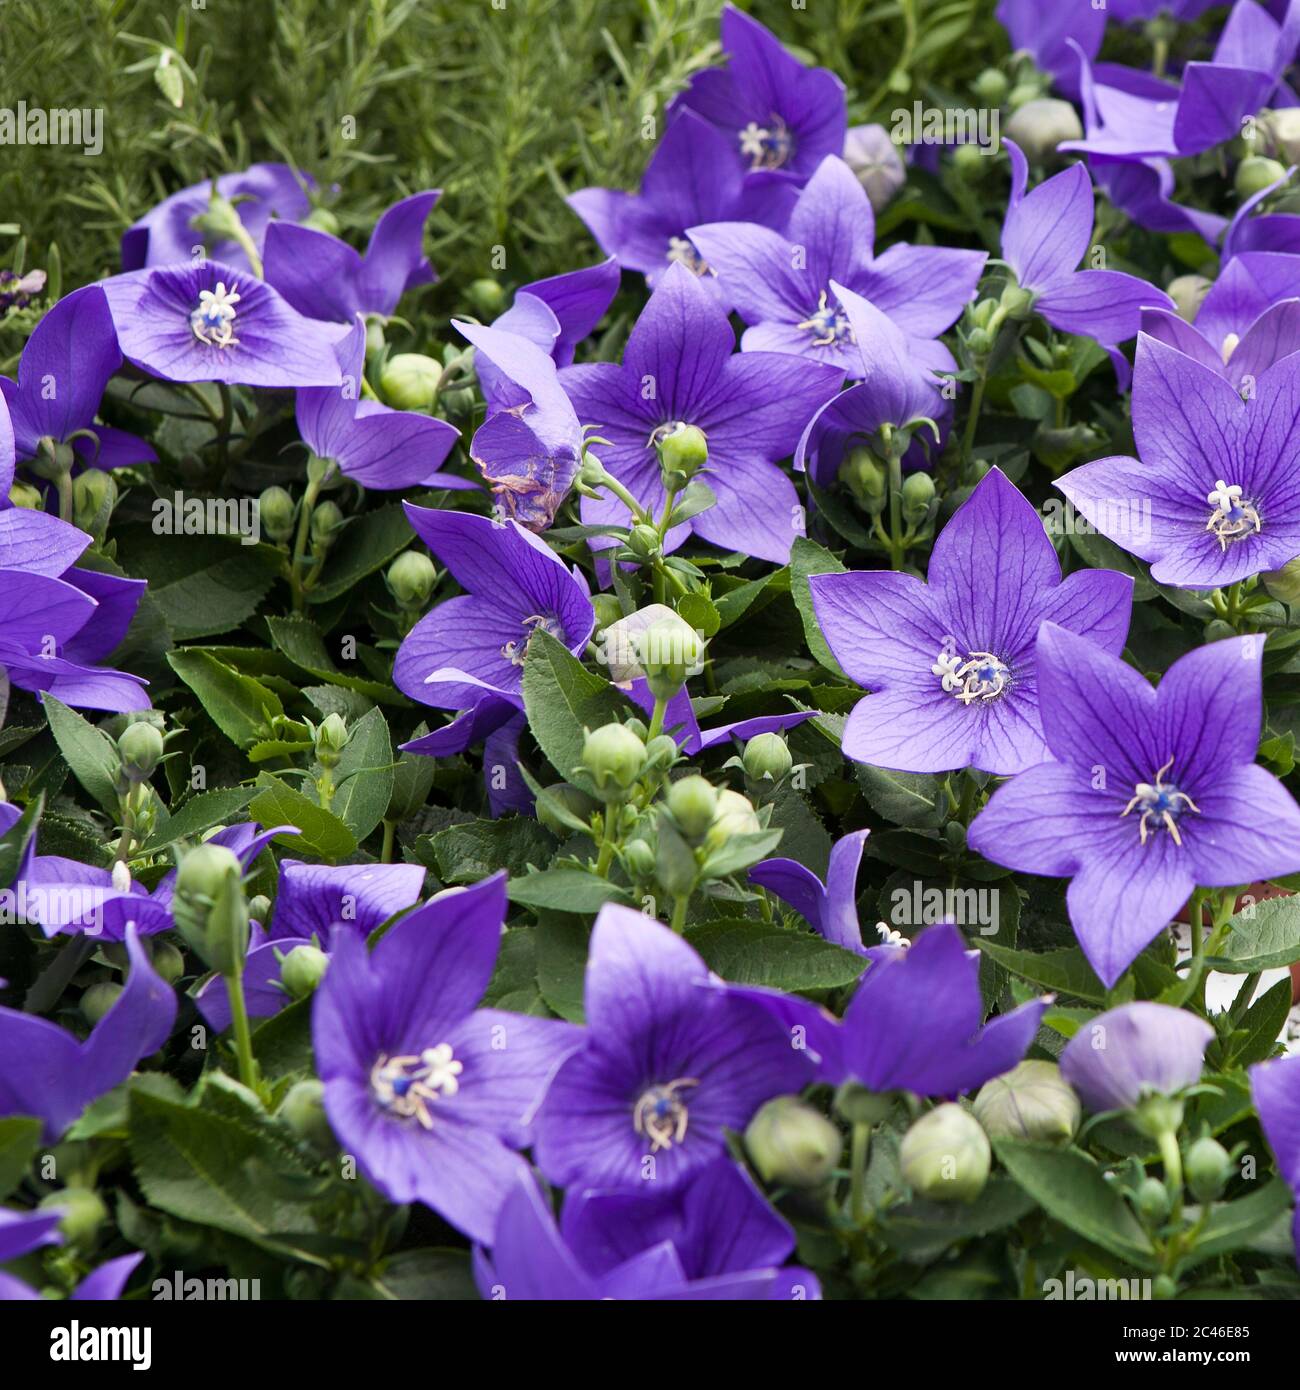 Campanula persicifolia ( Bellflower peach leaves , Campanula Persian or stick Jacob), purple bell flowers in summer garden. Background Stock Photo